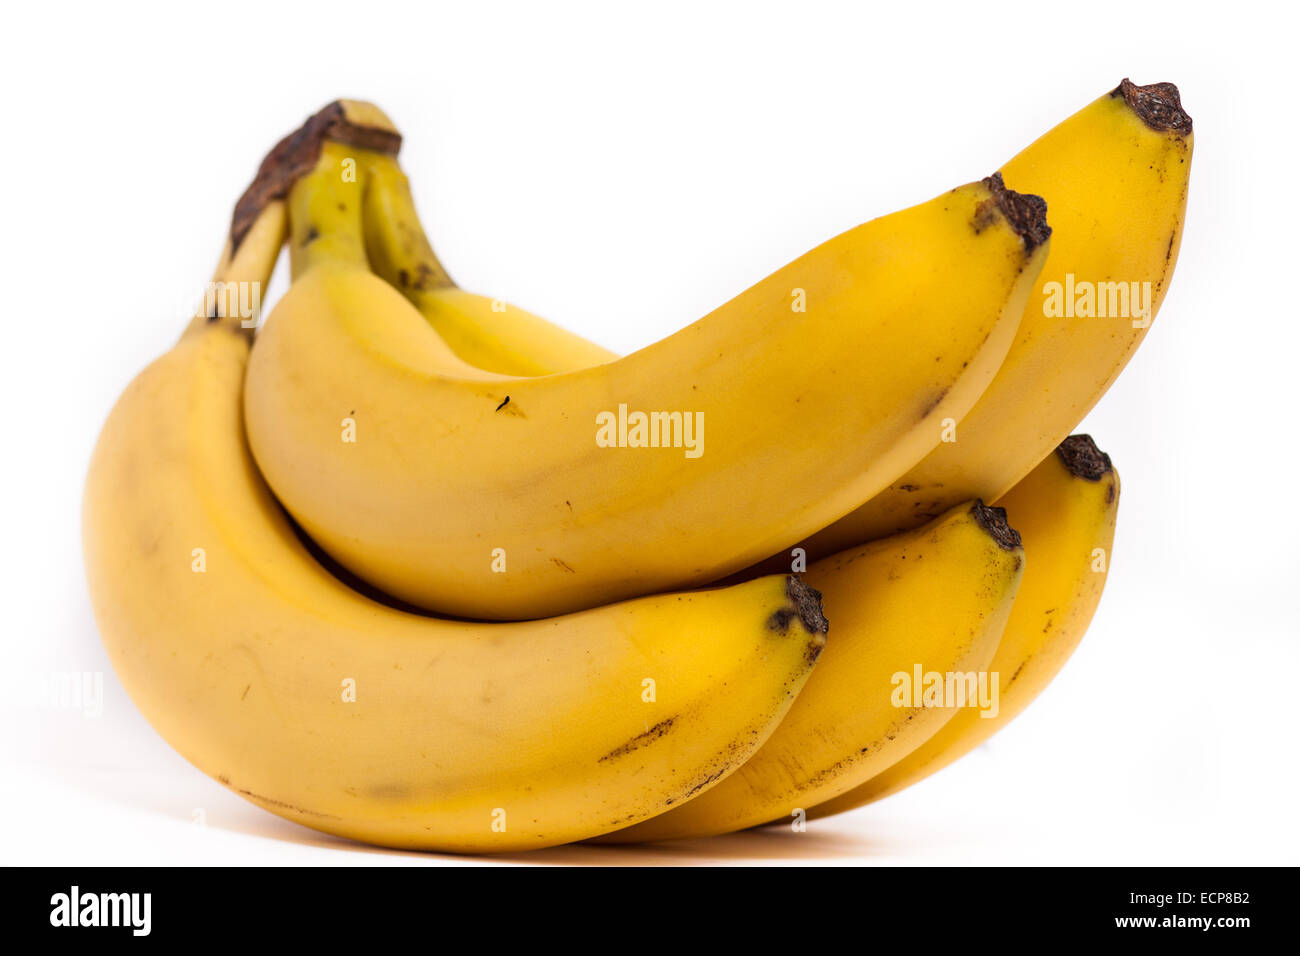 A bunch of isolated bananas on white background Stock Photo